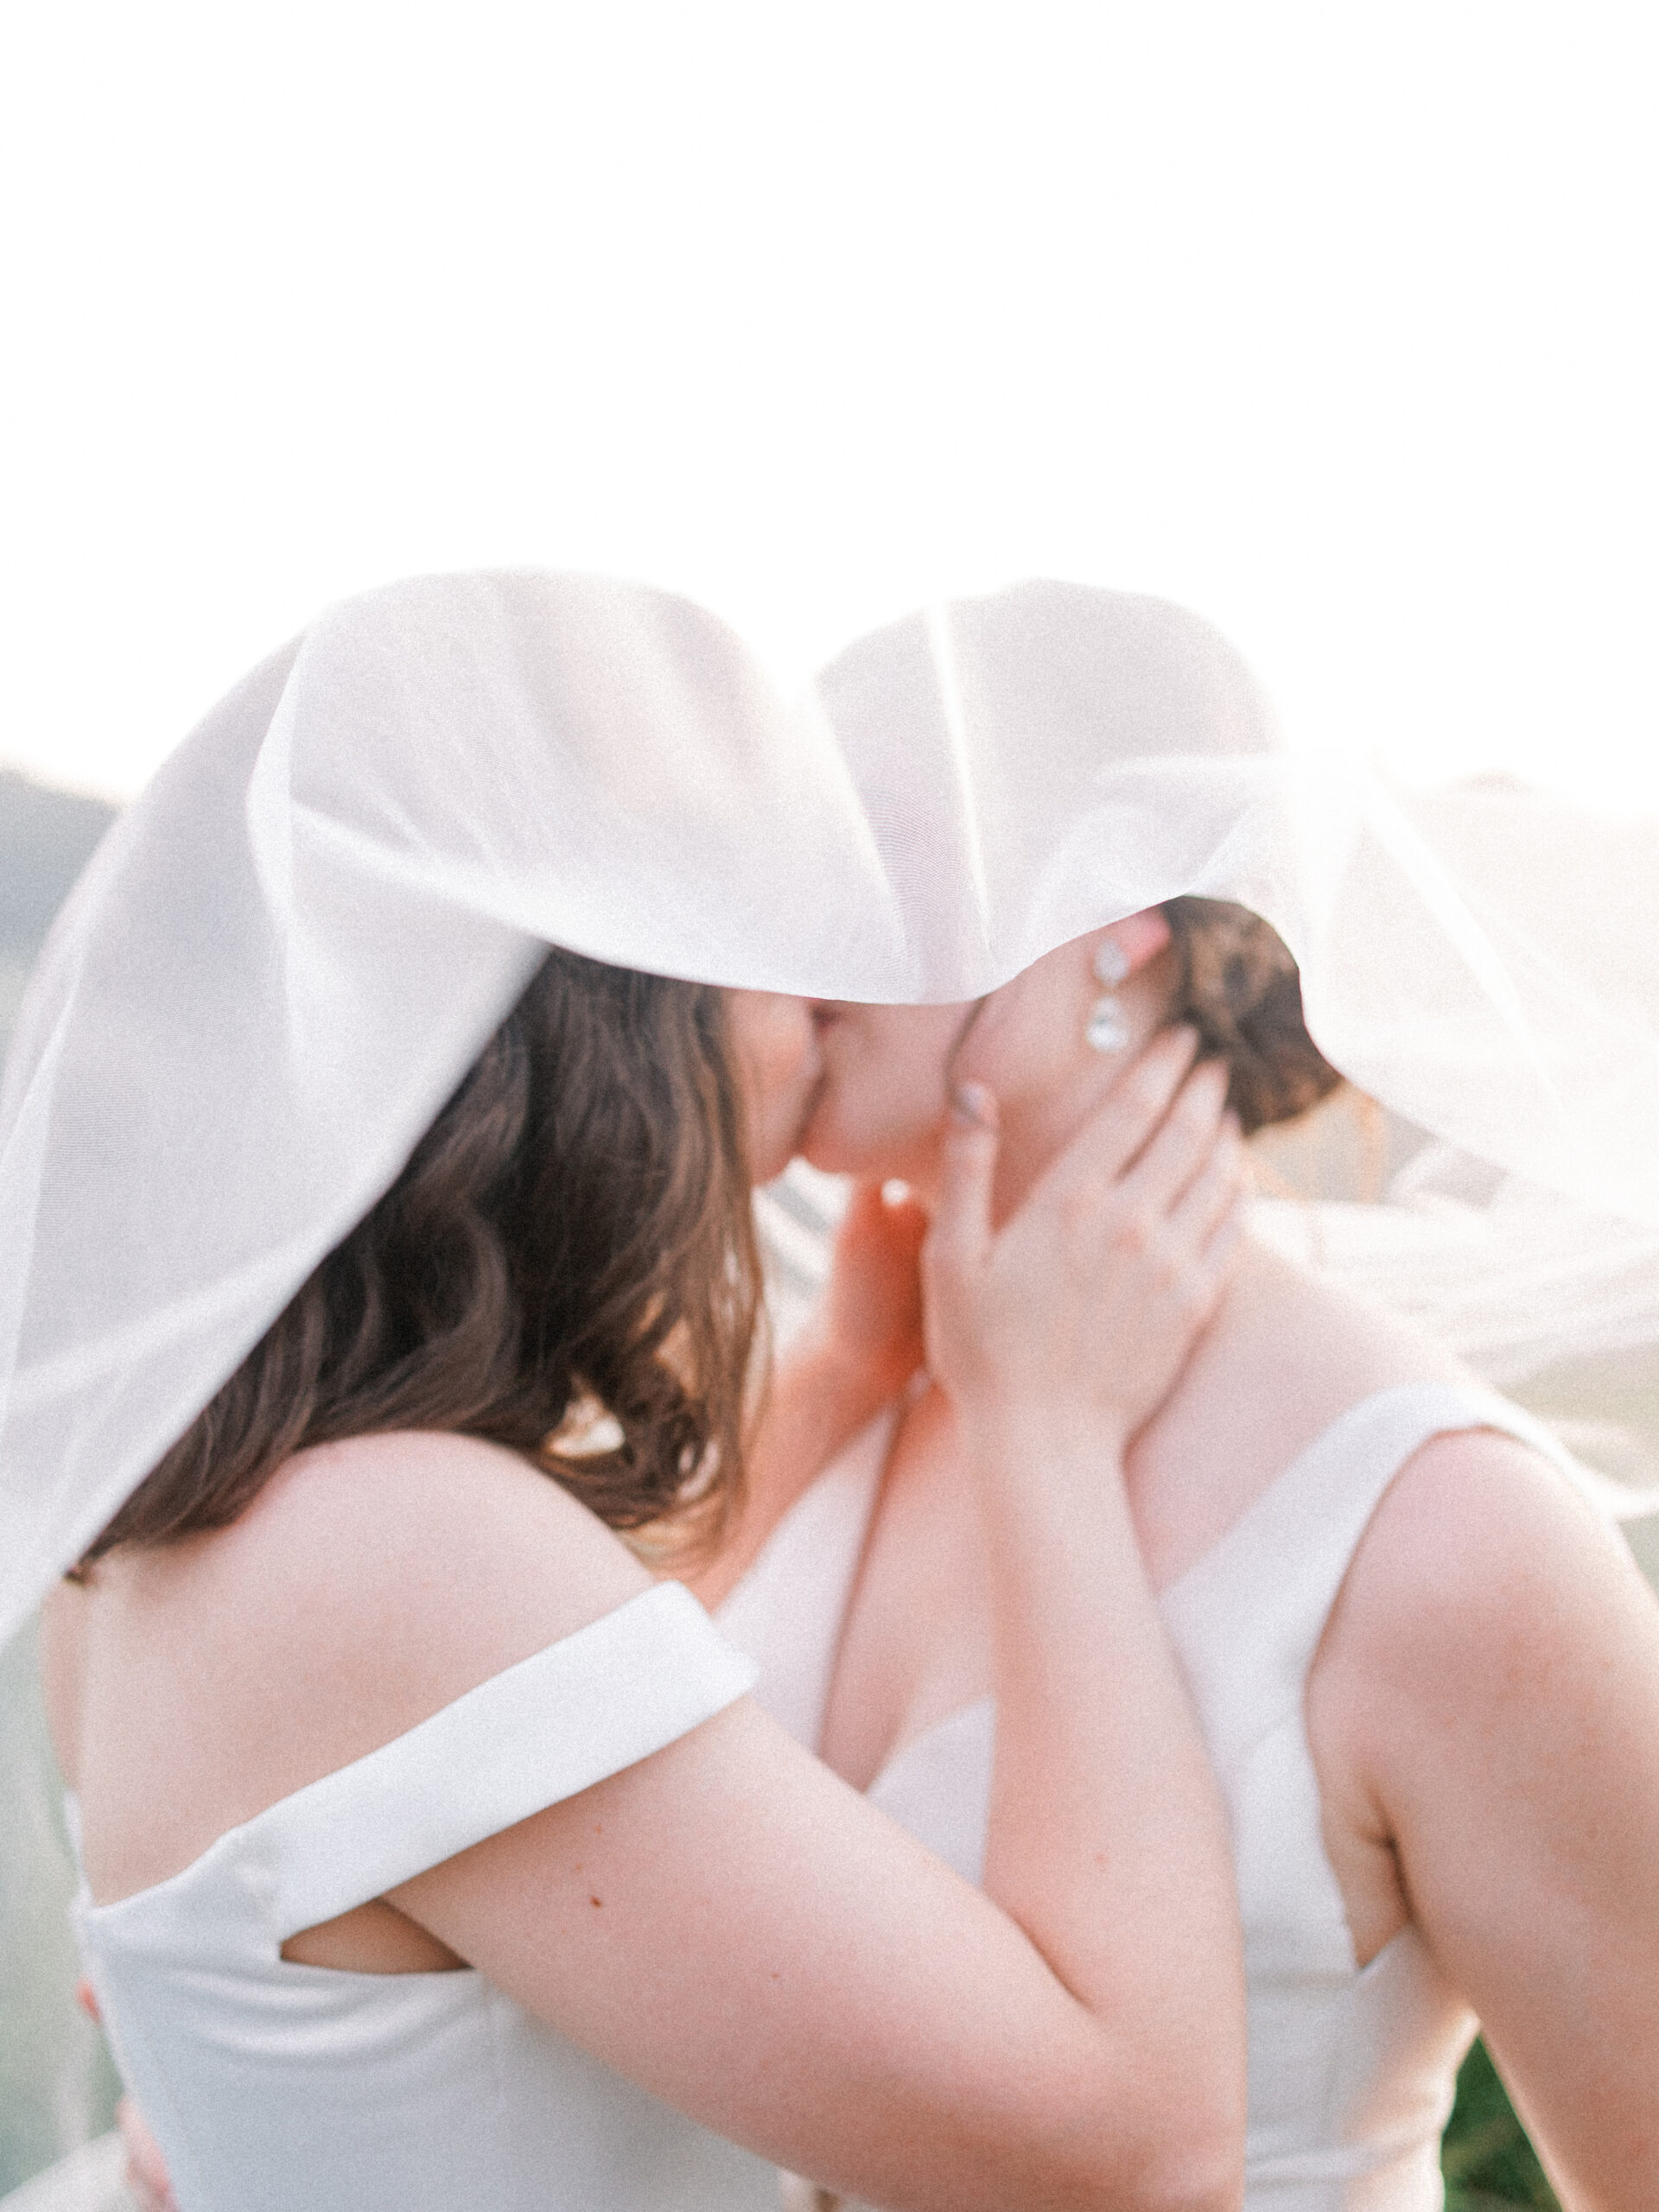 A photo of two brides kissing under a flowing veil.